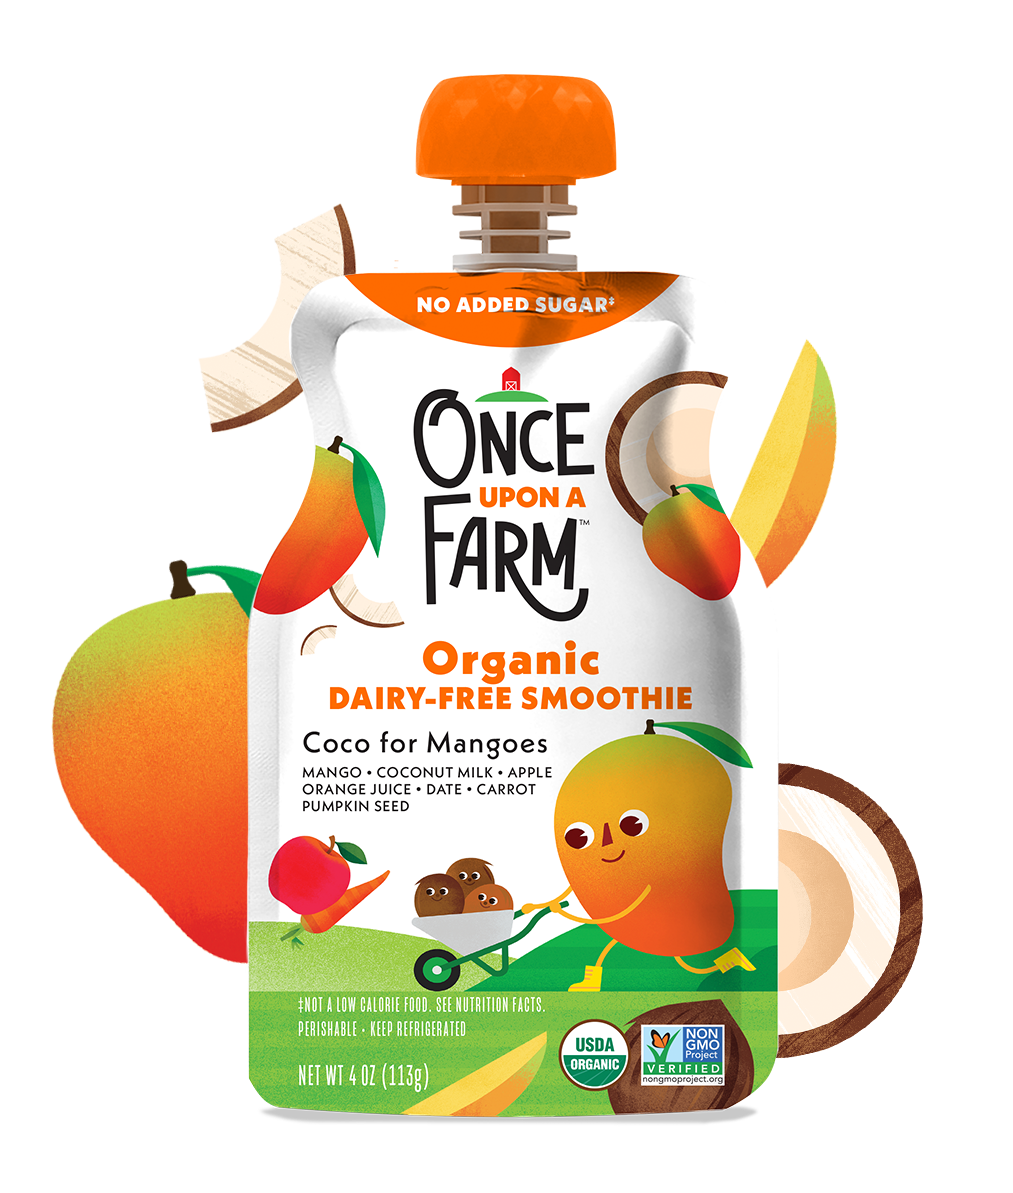 Once Upon a Farm | Coco for Mangoes Dairy-Free Smoothie